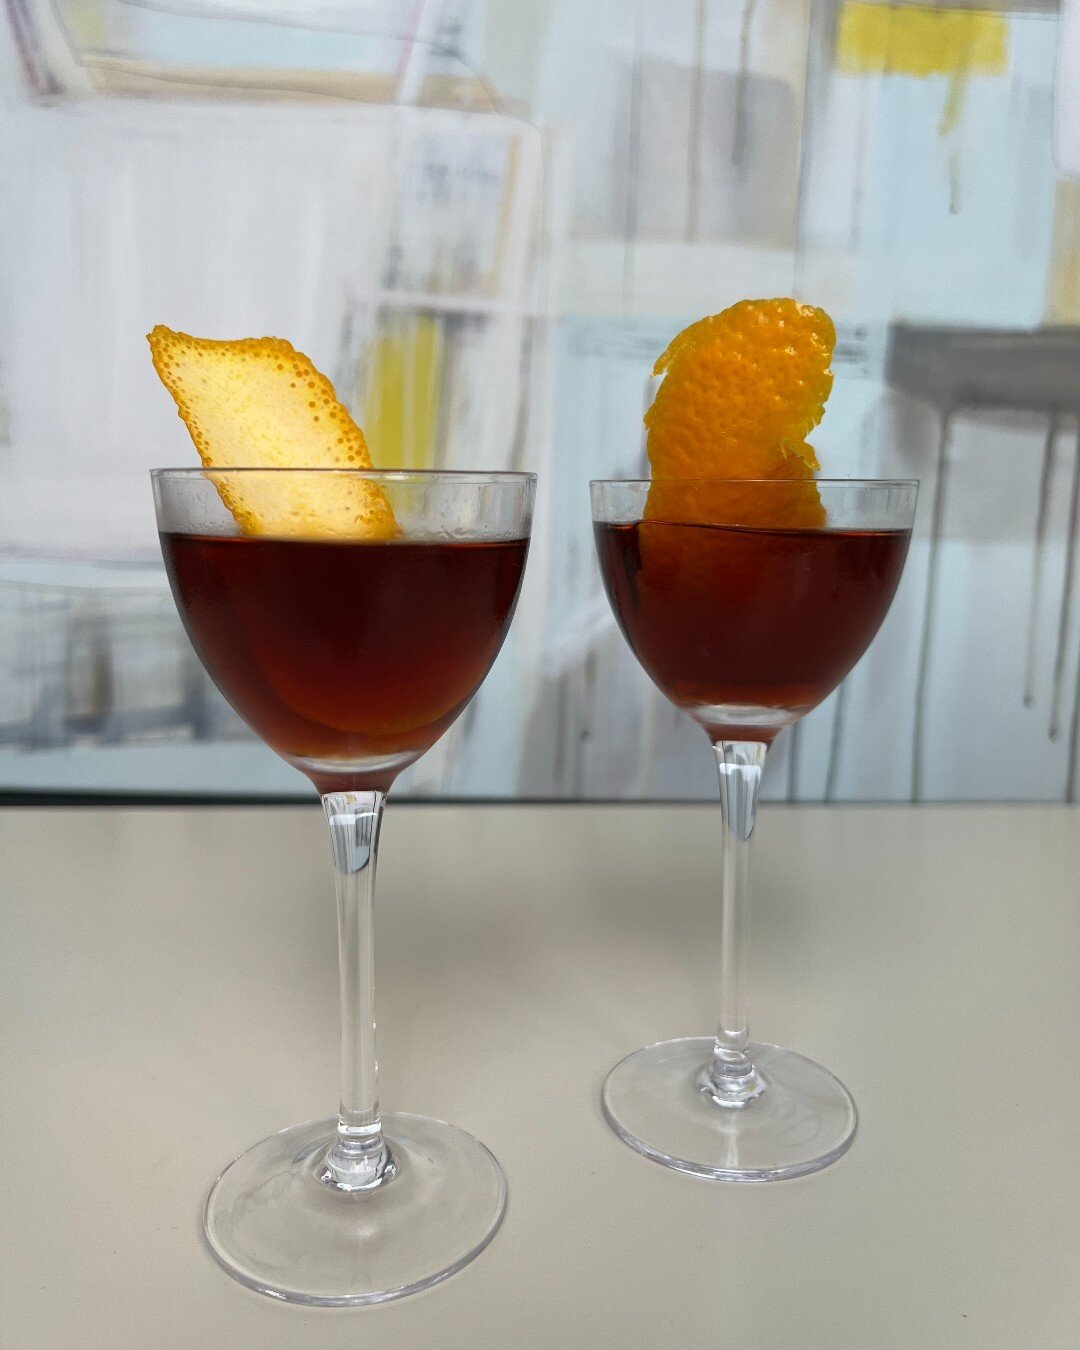 We loved the Big Chief cocktail! From the dainty Nick &amp; Nora glass, to the flambeaux orange peel, this one was a delight. 

* 2 oz Bourbon 
* 1/2 oz Averna
* 1/2 oz Punt e Mes
Garnish: Flambeaux Orange Peel

Add all ingredients to a mixing glass.